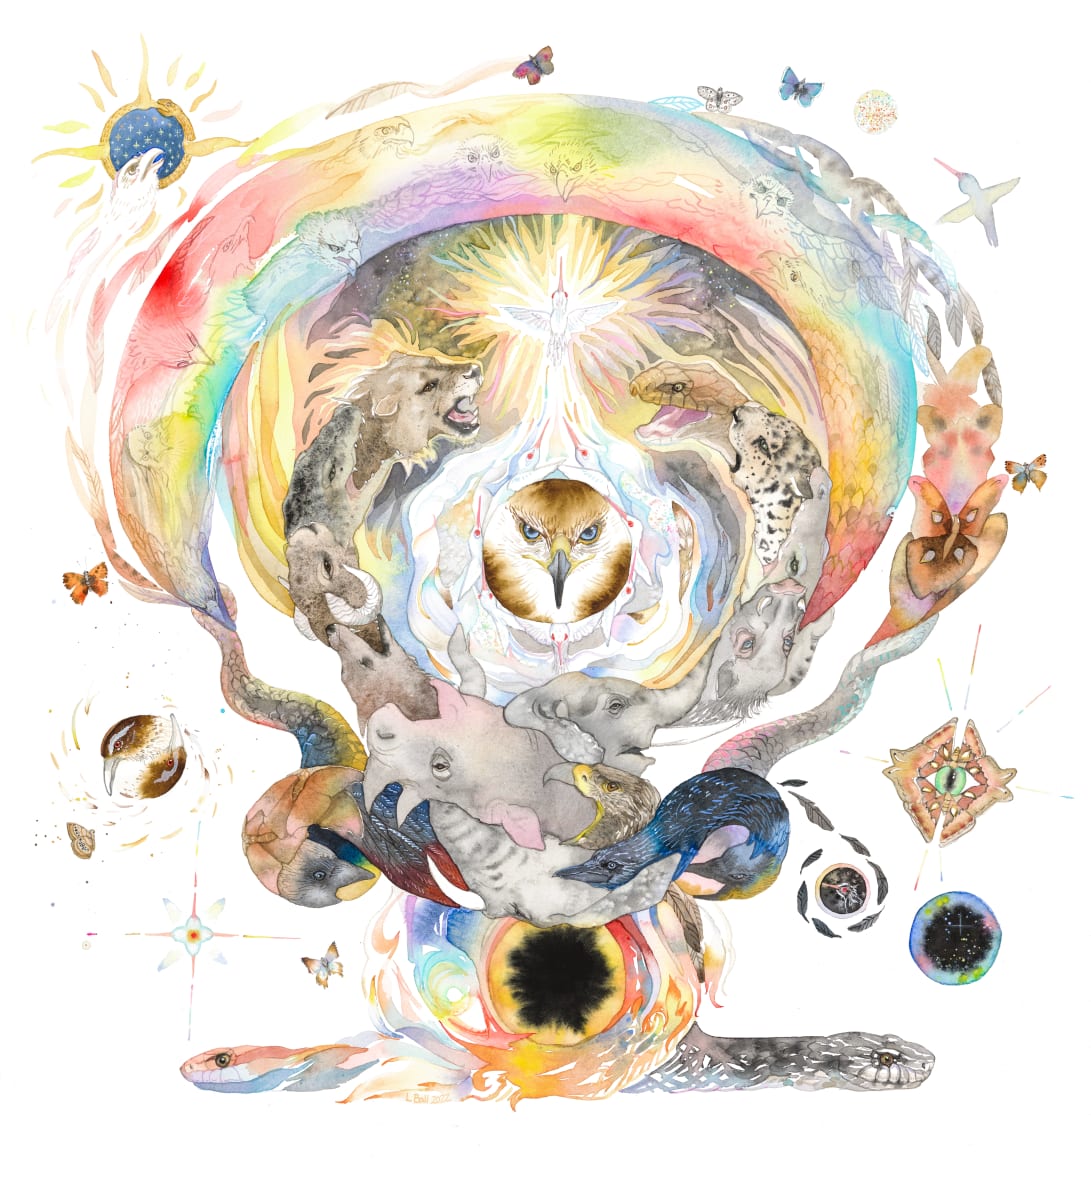 Separation of Earth and Sky (Blake) by Laura Ball  Image: Sunburst with mystical twisted animals and insects